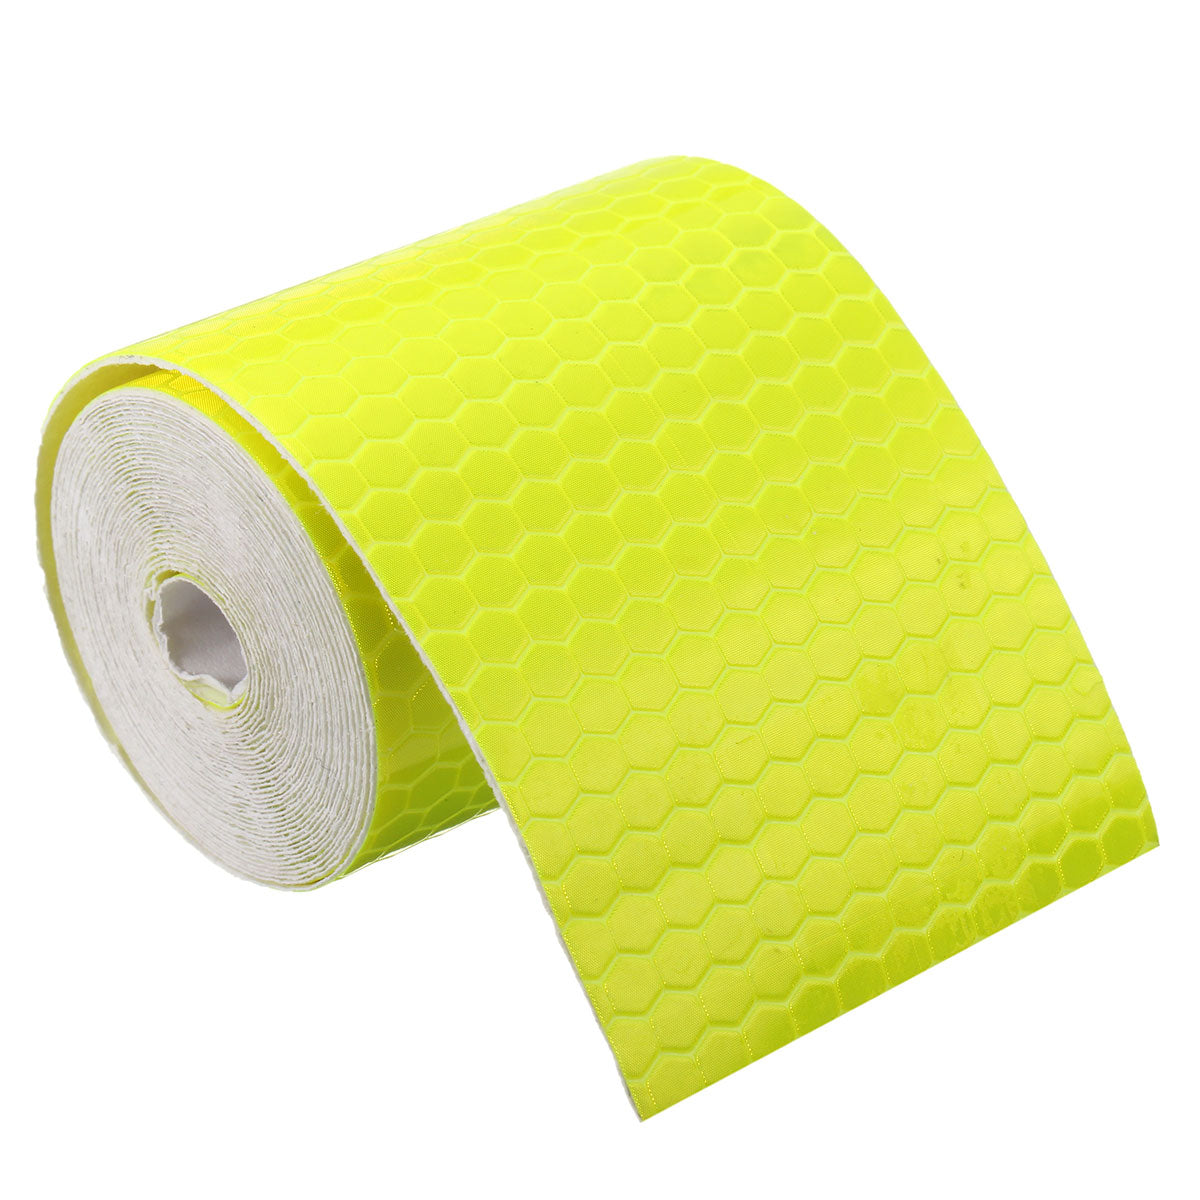 5cm X 300cm Reflective Safety Warning Conspicuity Tape Film Car Sticker 